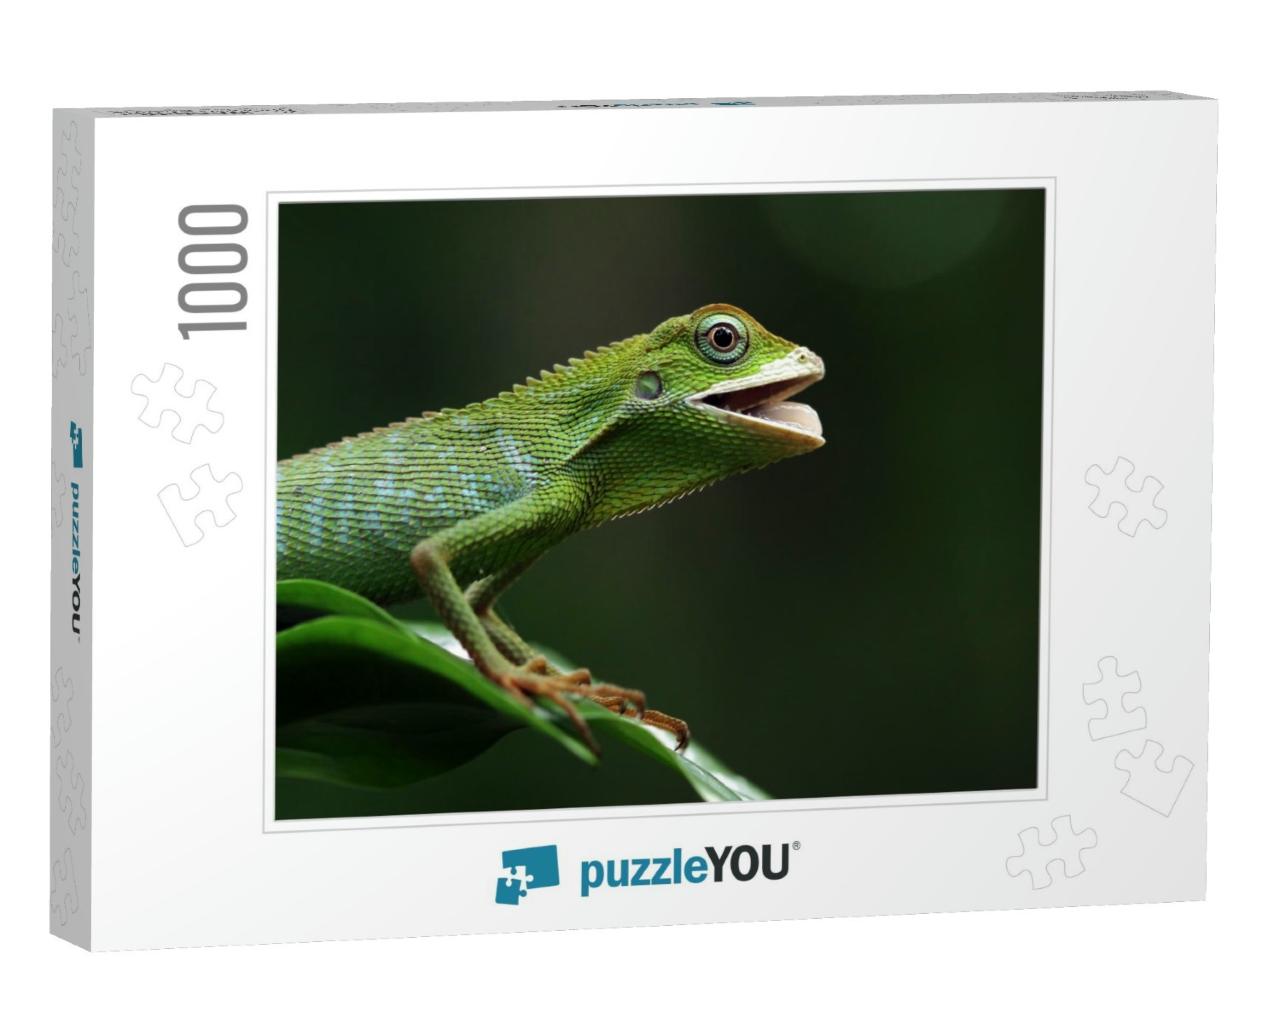 Green Lizard on Branch, Green Lizard Sunbathing on Branch... Jigsaw Puzzle with 1000 pieces